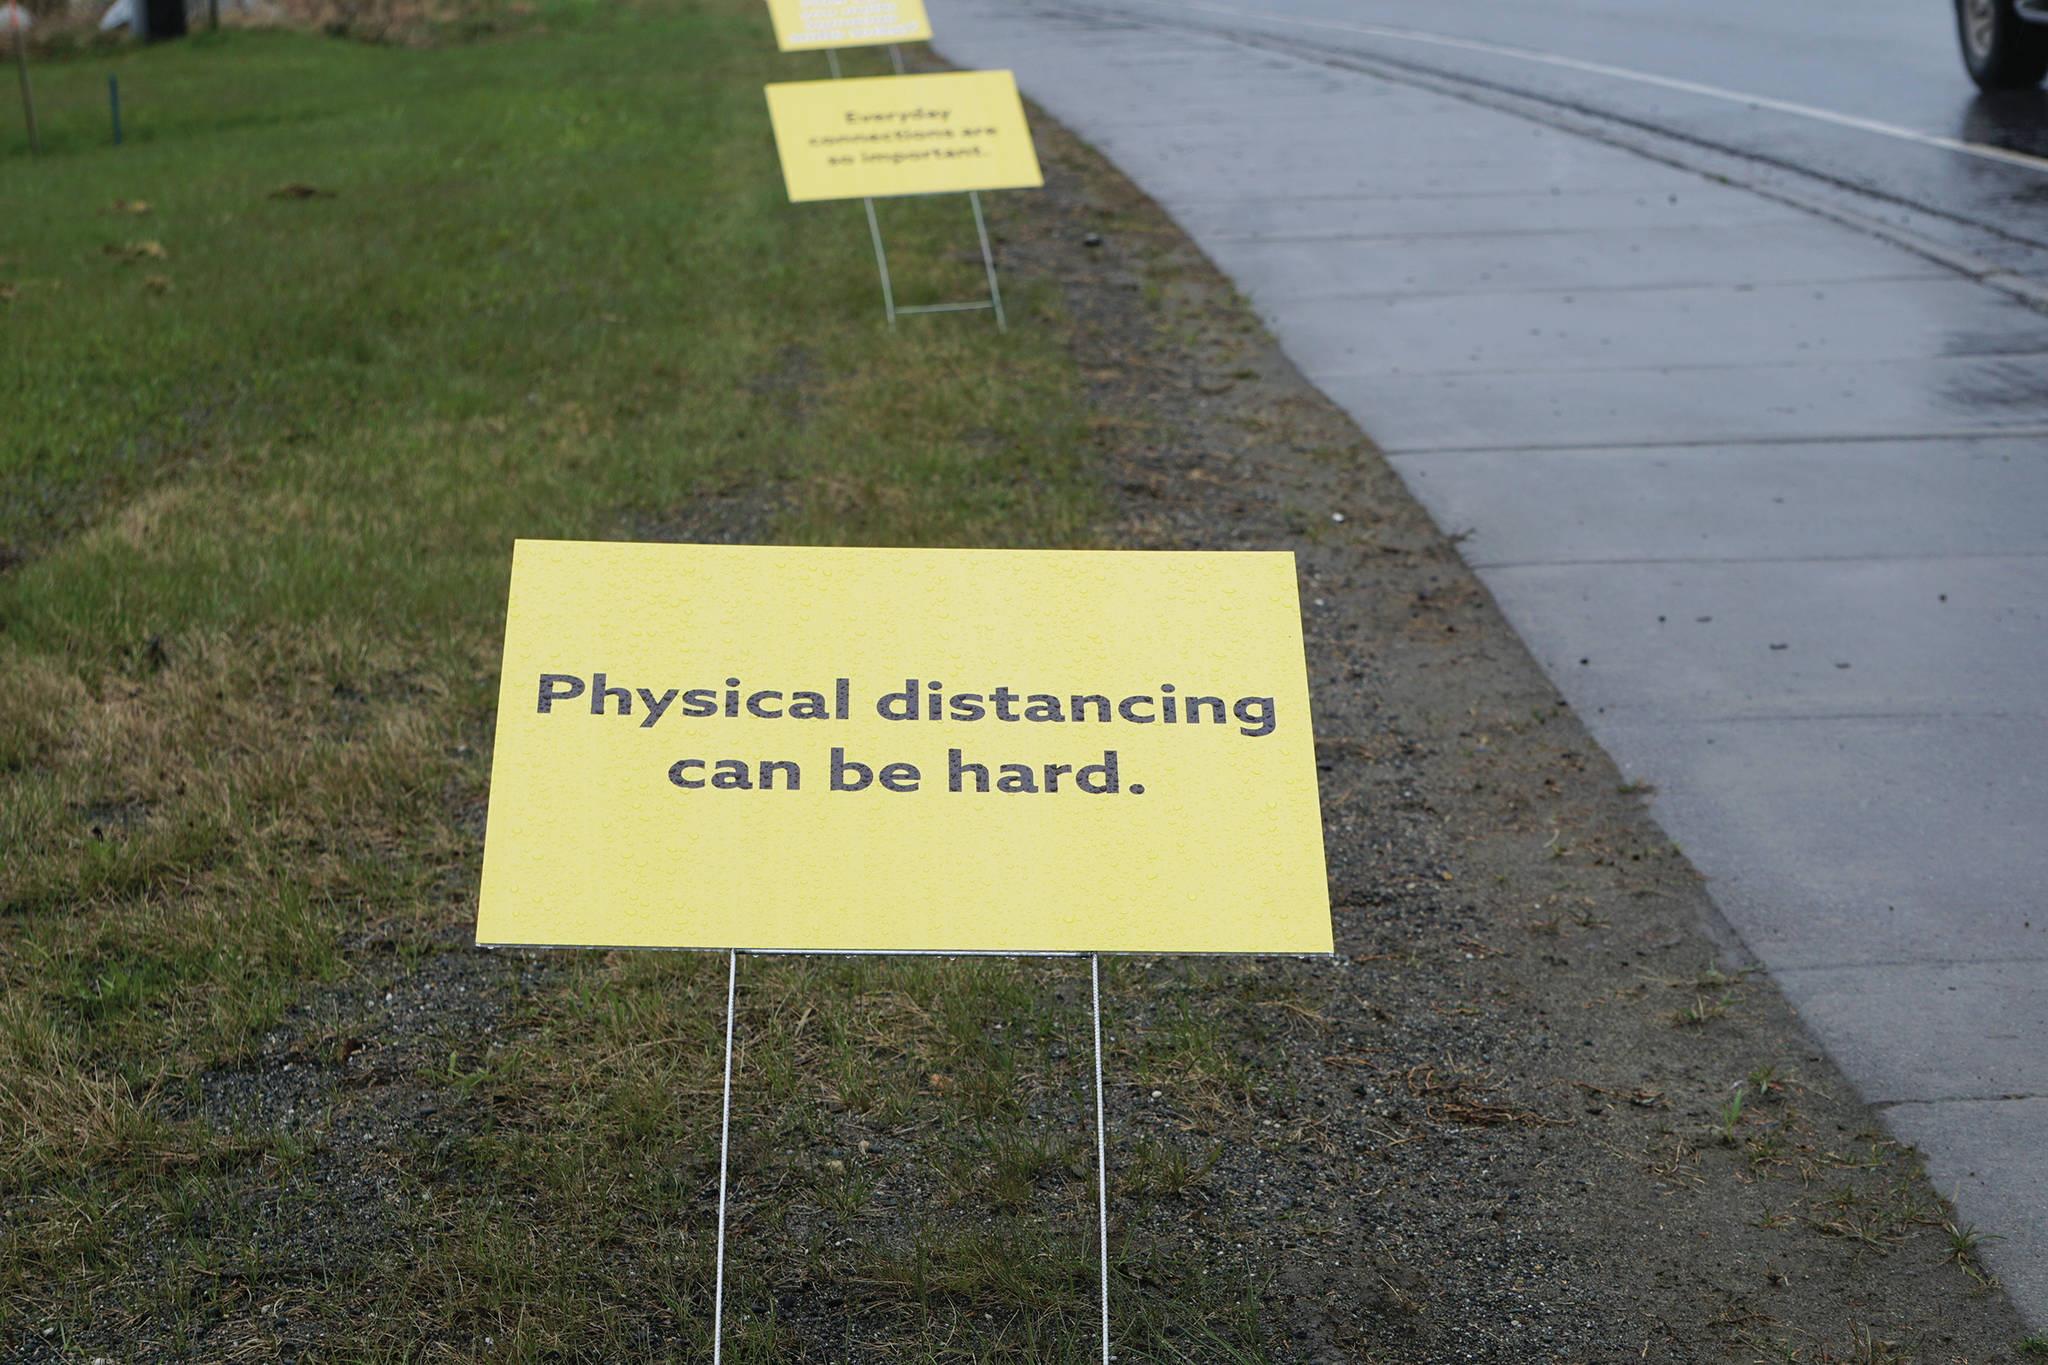 Signs on May 7, 2020, along the Sterling Highway by St. Augustine’s Episcopal Church in Homer, Alaska, and put up by the South Kenai Peninsula Resiliency Coalition offer encouragement during the COVID-19 pandemic. The signs read “Physical distancing can be hard. Everyday connections are so important. How can you make someone smile today?” (Photo by Michael Armstrong/Homer News)